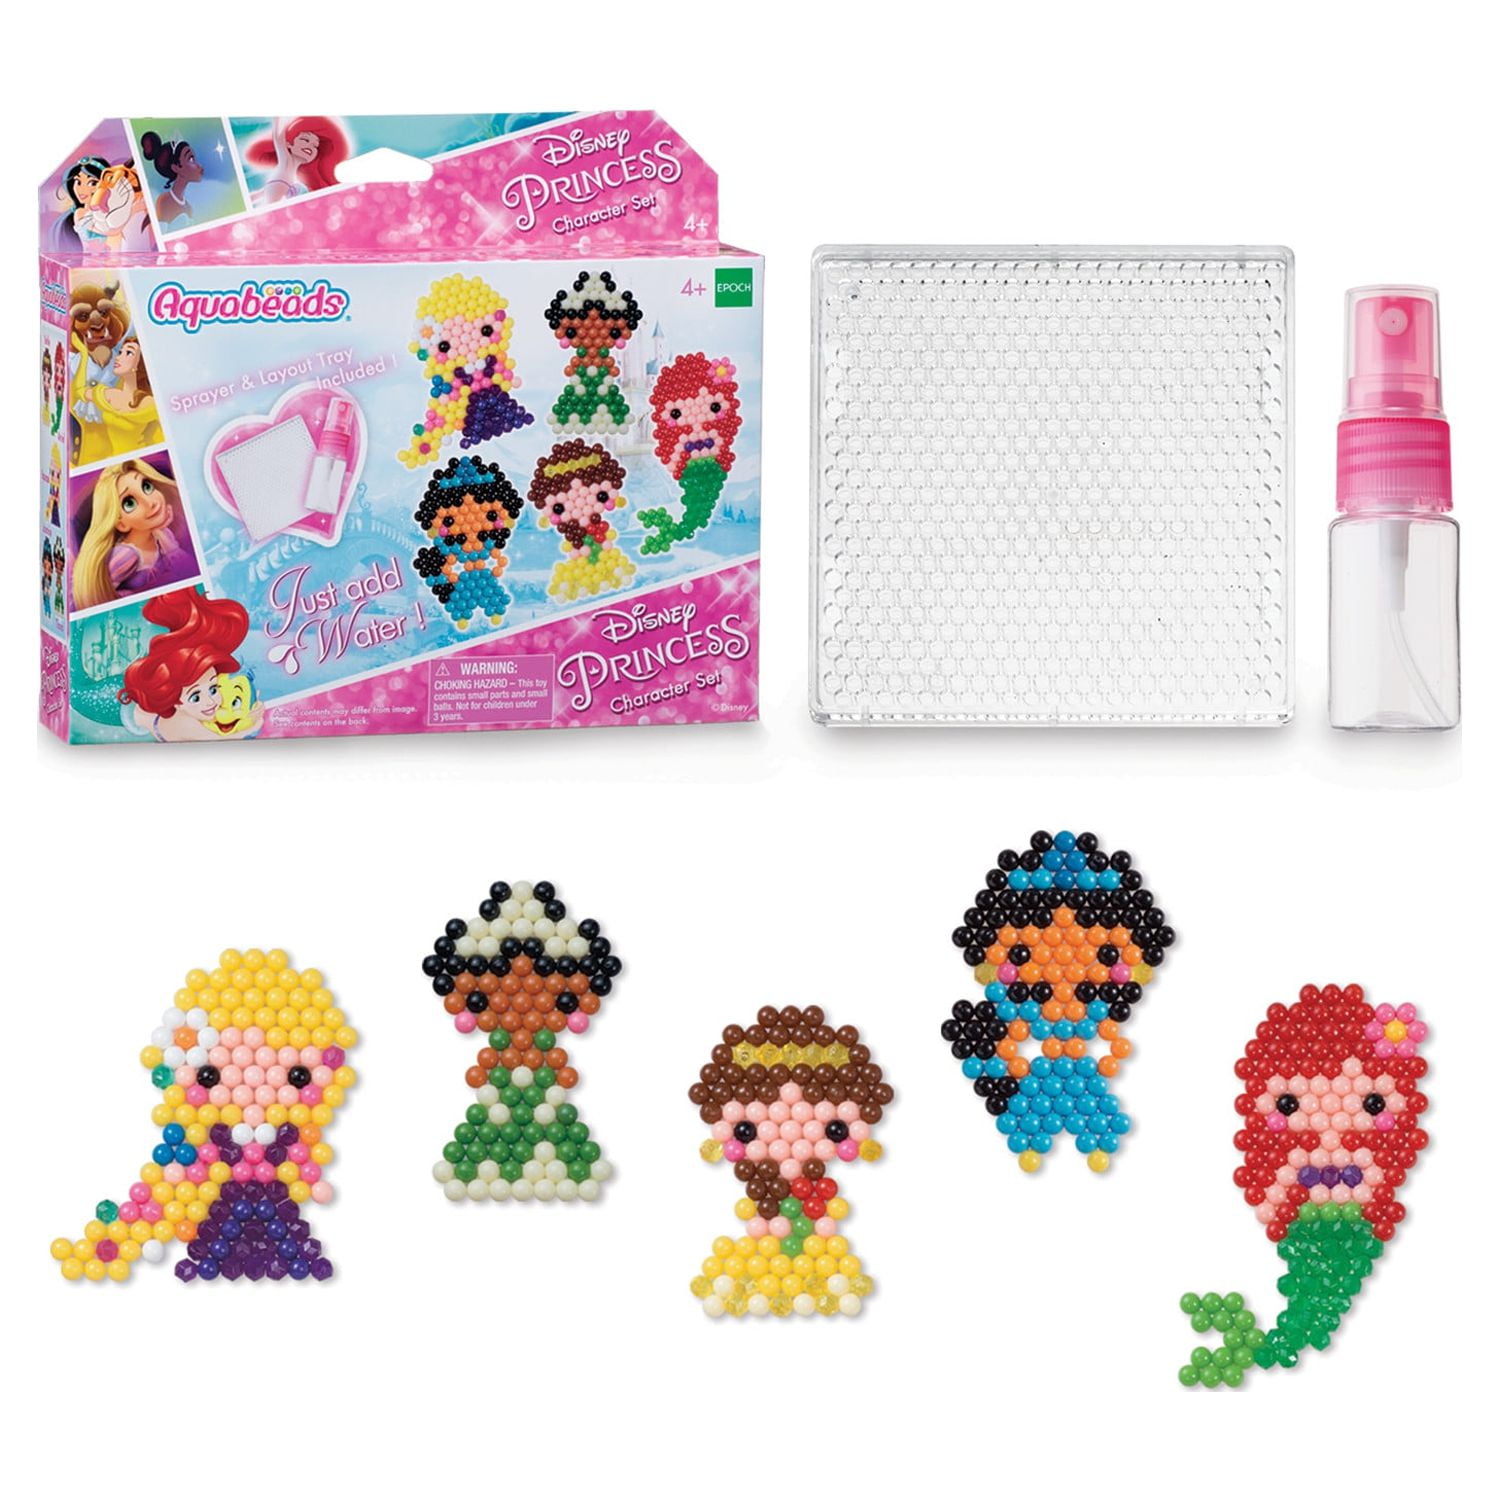 Aquabeads Starter Pack Complete Arts & Crafts Bead Kit for Children - over  650 Beads 